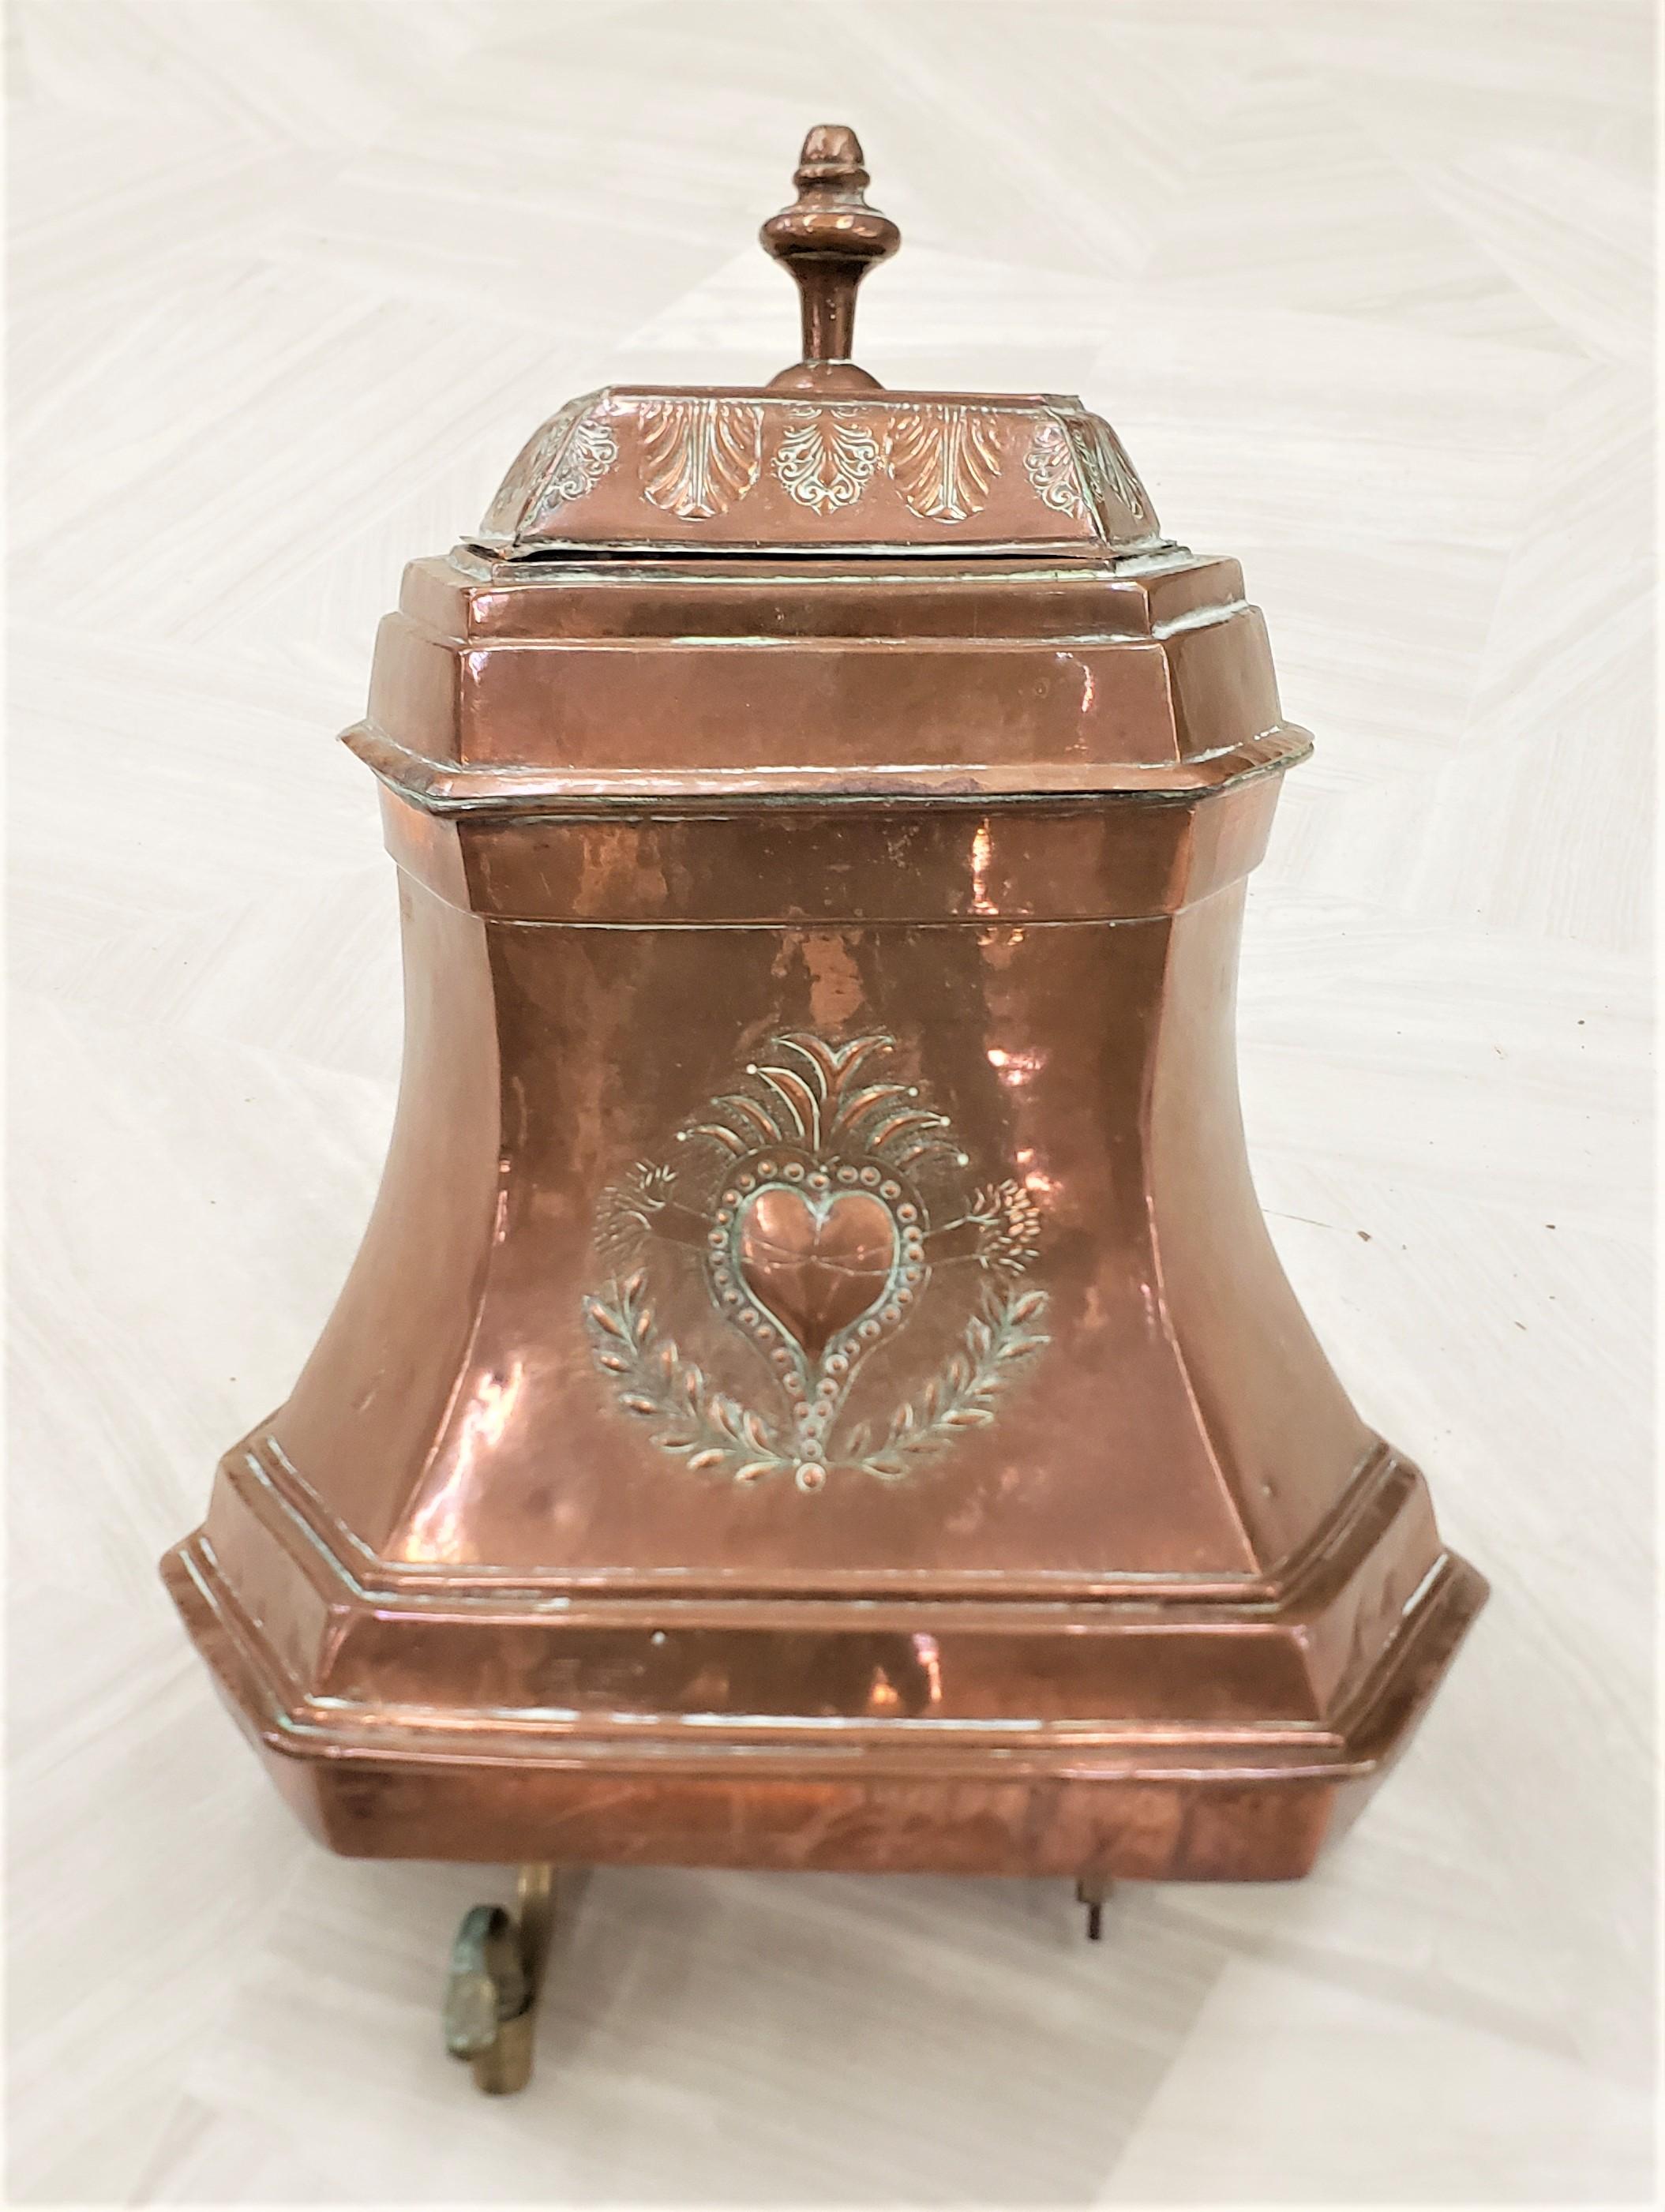 Antique French Copper Converted Cistern & Sink Planter Box or Garden Ornament In Good Condition For Sale In Hamilton, Ontario